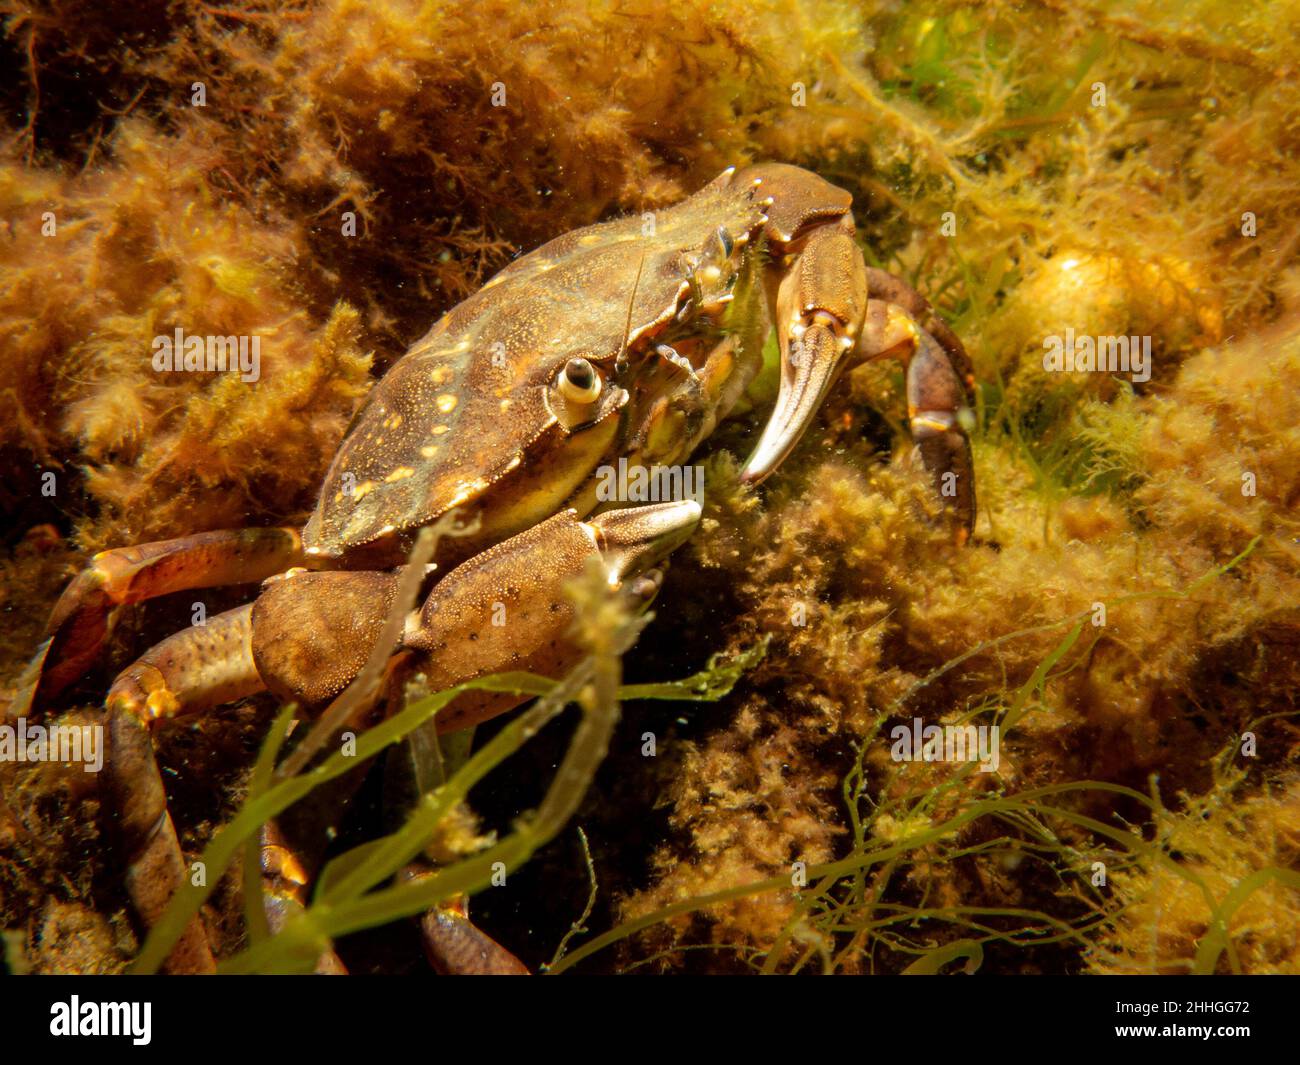 A crab among seaweed and stones. Picture from The Sound, between Sweden and Denmark Stock Photo